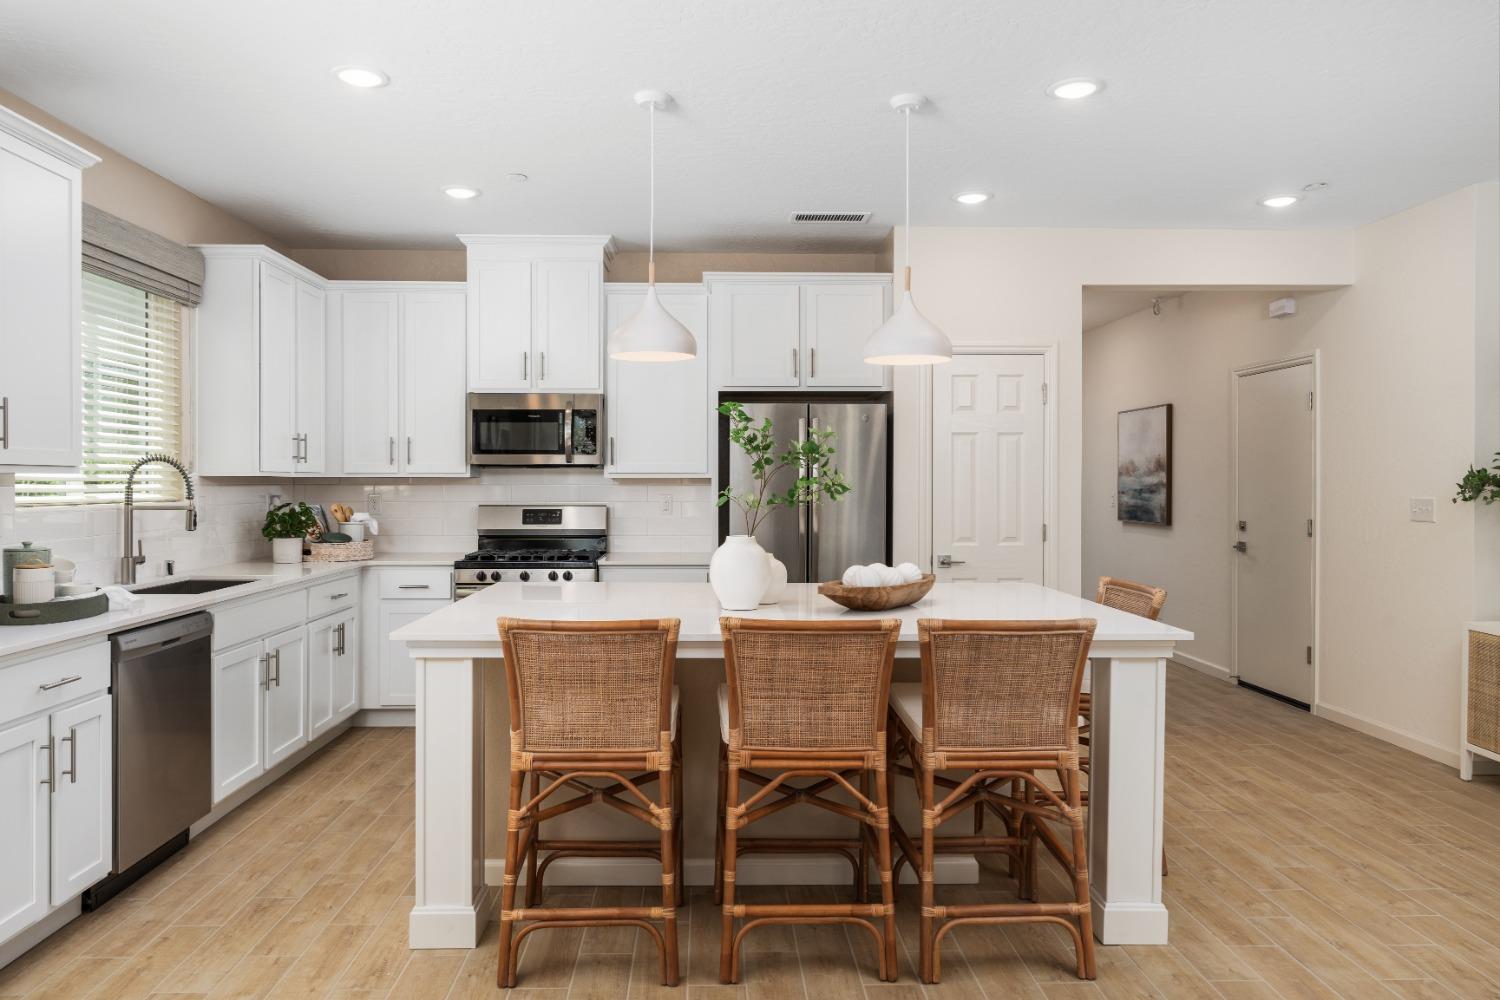 a kitchen with stainless steel appliances kitchen island granite countertop a dining table chairs refrigerator and sink